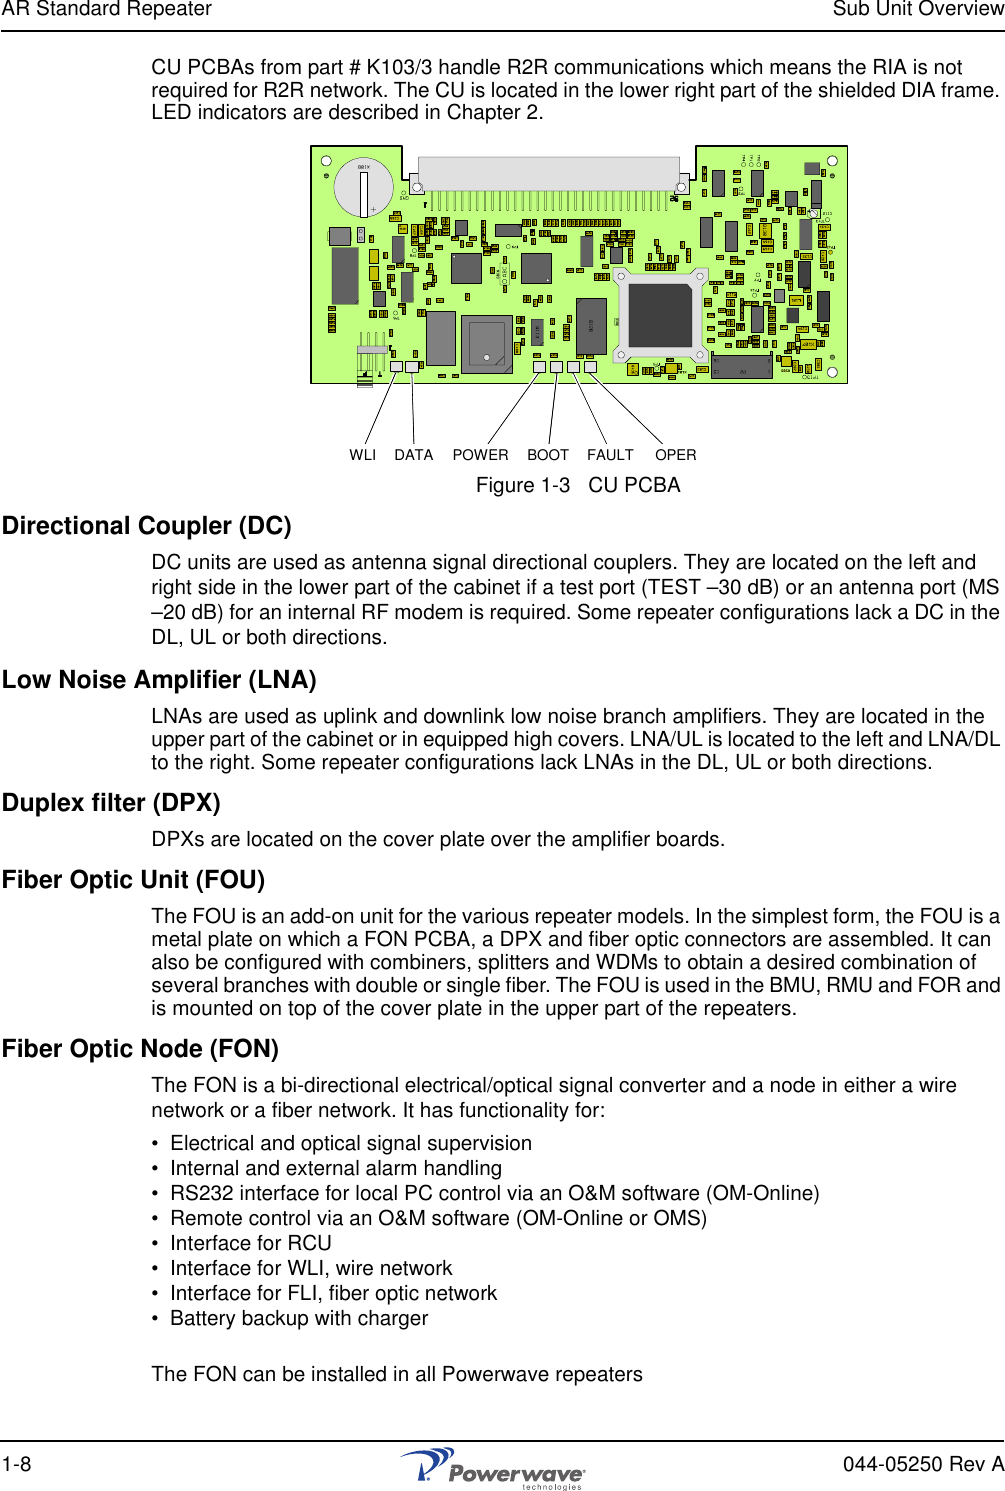 AR Standard Repeater Sub Unit Overview1-8 044-05250 Rev ACU PCBAs from part # K103/3 handle R2R communications which means the RIA is not required for R2R network. The CU is located in the lower right part of the shielded DIA frame. LED indicators are described in Chapter 2.Figure 1-3   CU PCBADirectional Coupler (DC)DC units are used as antenna signal directional couplers. They are located on the left and right side in the lower part of the cabinet if a test port (TEST –30 dB) or an antenna port (MS –20 dB) for an internal RF modem is required. Some repeater configurations lack a DC in the DL, UL or both directions.Low Noise Amplifier (LNA)LNAs are used as uplink and downlink low noise branch amplifiers. They are located in the upper part of the cabinet or in equipped high covers. LNA/UL is located to the left and LNA/DL to the right. Some repeater configurations lack LNAs in the DL, UL or both directions.Duplex filter (DPX)DPXs are located on the cover plate over the amplifier boards.Fiber Optic Unit (FOU)The FOU is an add-on unit for the various repeater models. In the simplest form, the FOU is a metal plate on which a FON PCBA, a DPX and fiber optic connectors are assembled. It can also be configured with combiners, splitters and WDMs to obtain a desired combination of several branches with double or single fiber. The FOU is used in the BMU, RMU and FOR and is mounted on top of the cover plate in the upper part of the repeaters.Fiber Optic Node (FON)The FON is a bi-directional electrical/optical signal converter and a node in either a wire network or a fiber network. It has functionality for:•  Electrical and optical signal supervision•  Internal and external alarm handling•  RS232 interface for local PC control via an O&amp;M software (OM-Online)•  Remote control via an O&amp;M software (OM-Online or OMS)•  Interface for RCU•  Interface for WLI, wire network•  Interface for FLI, fiber optic network•  Battery backup with chargerThe FON can be installed in all Powerwave repeatersWLI DATA POWER BOOT FAULT OPER